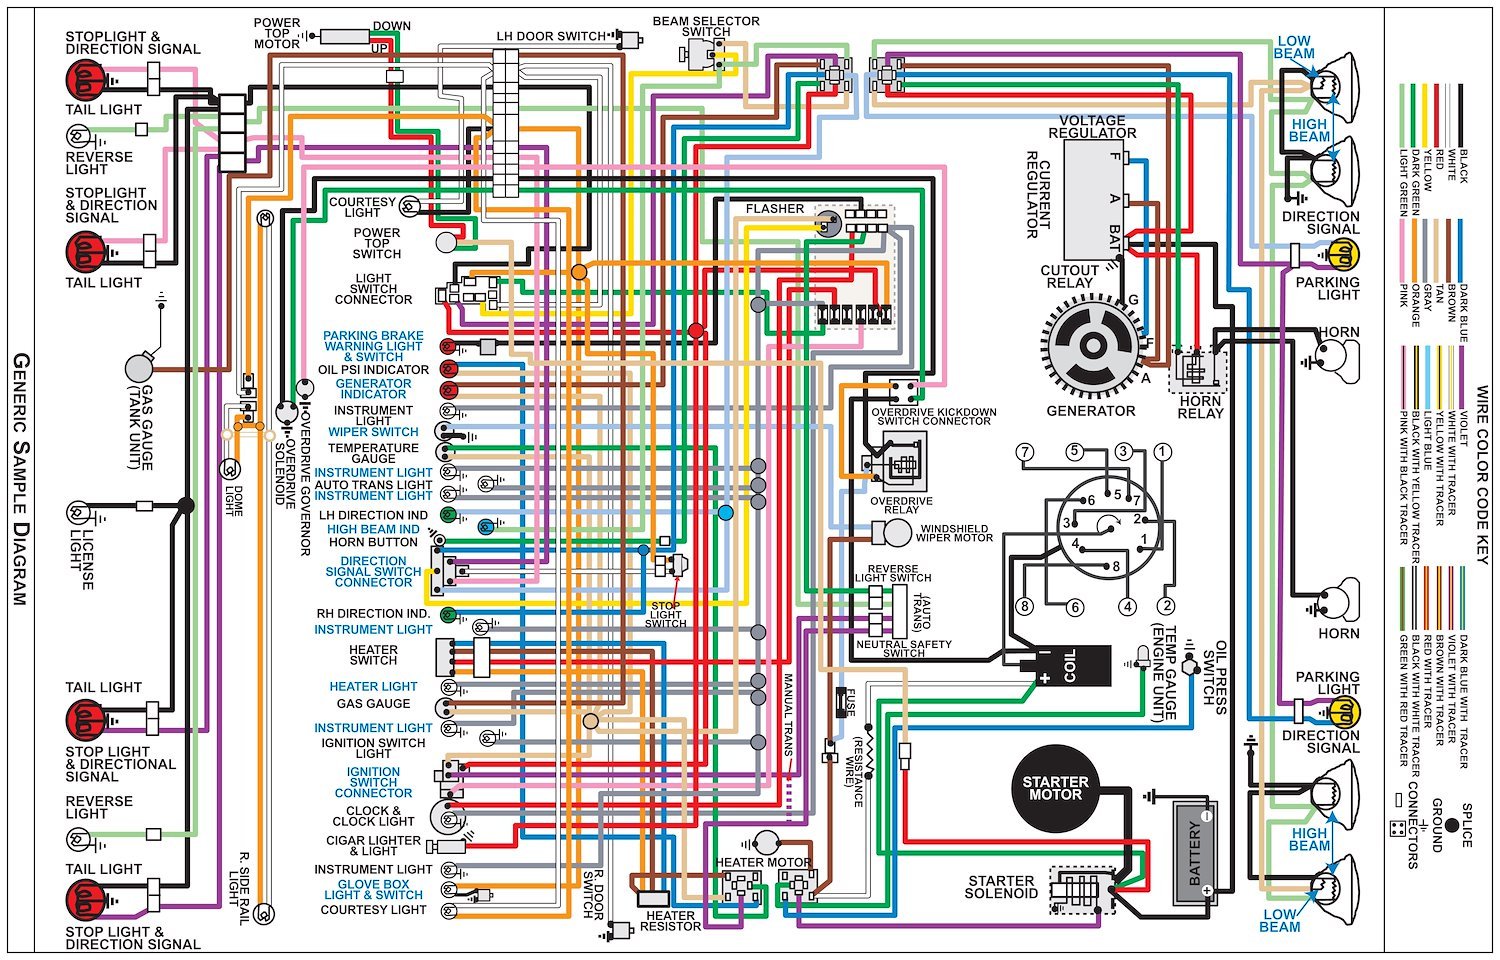 Wiring Diagram for 1967 Ford F-Series Truck, 11 in x 17 in., Laminated